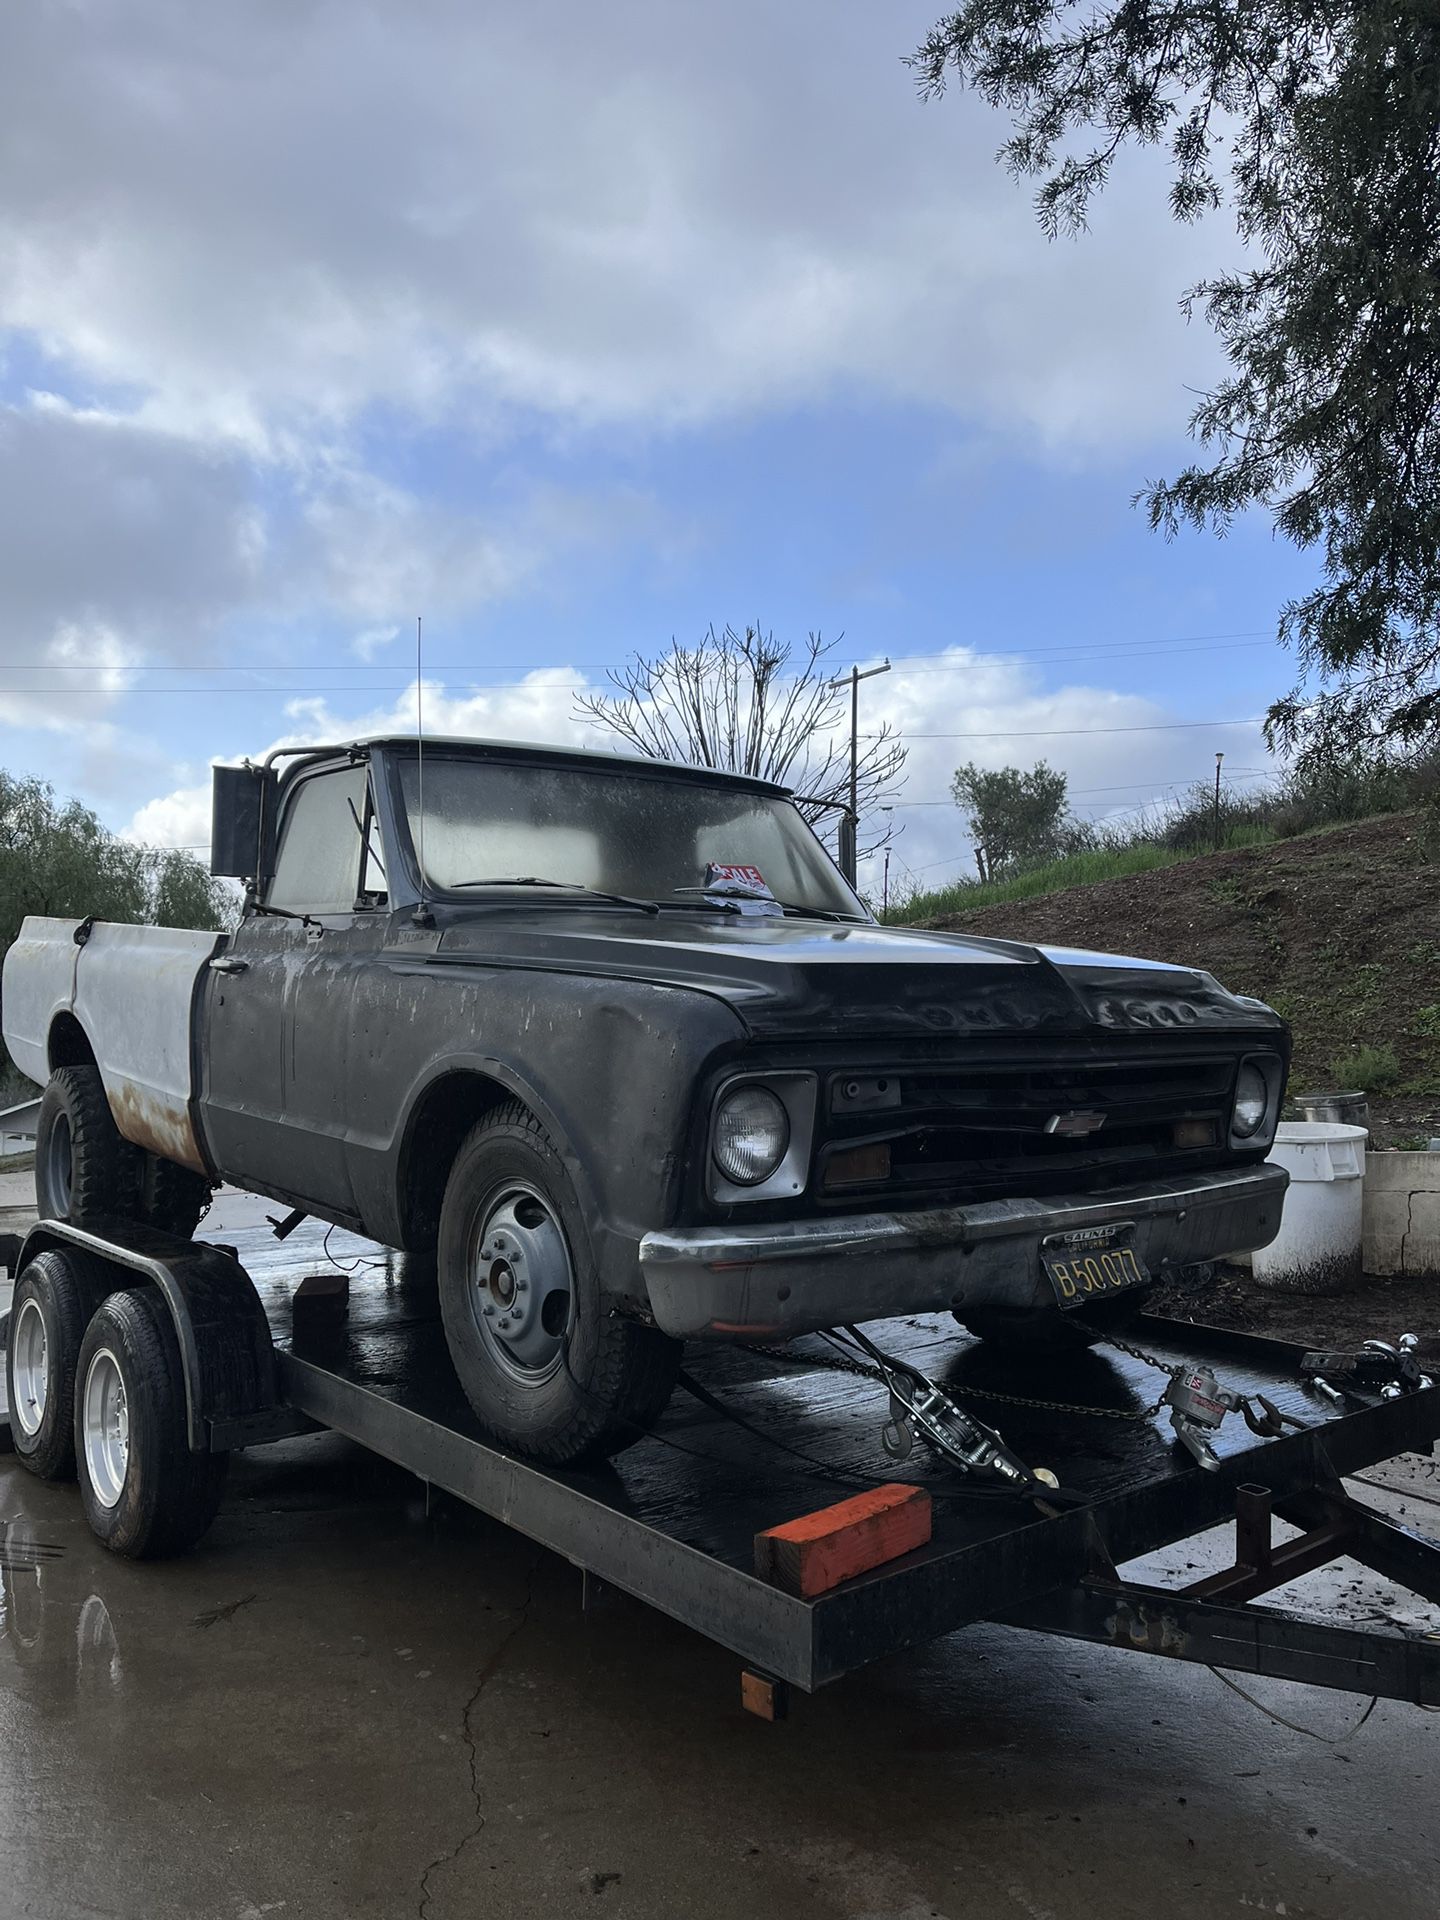 67 Chevy Dually Truck (Project)